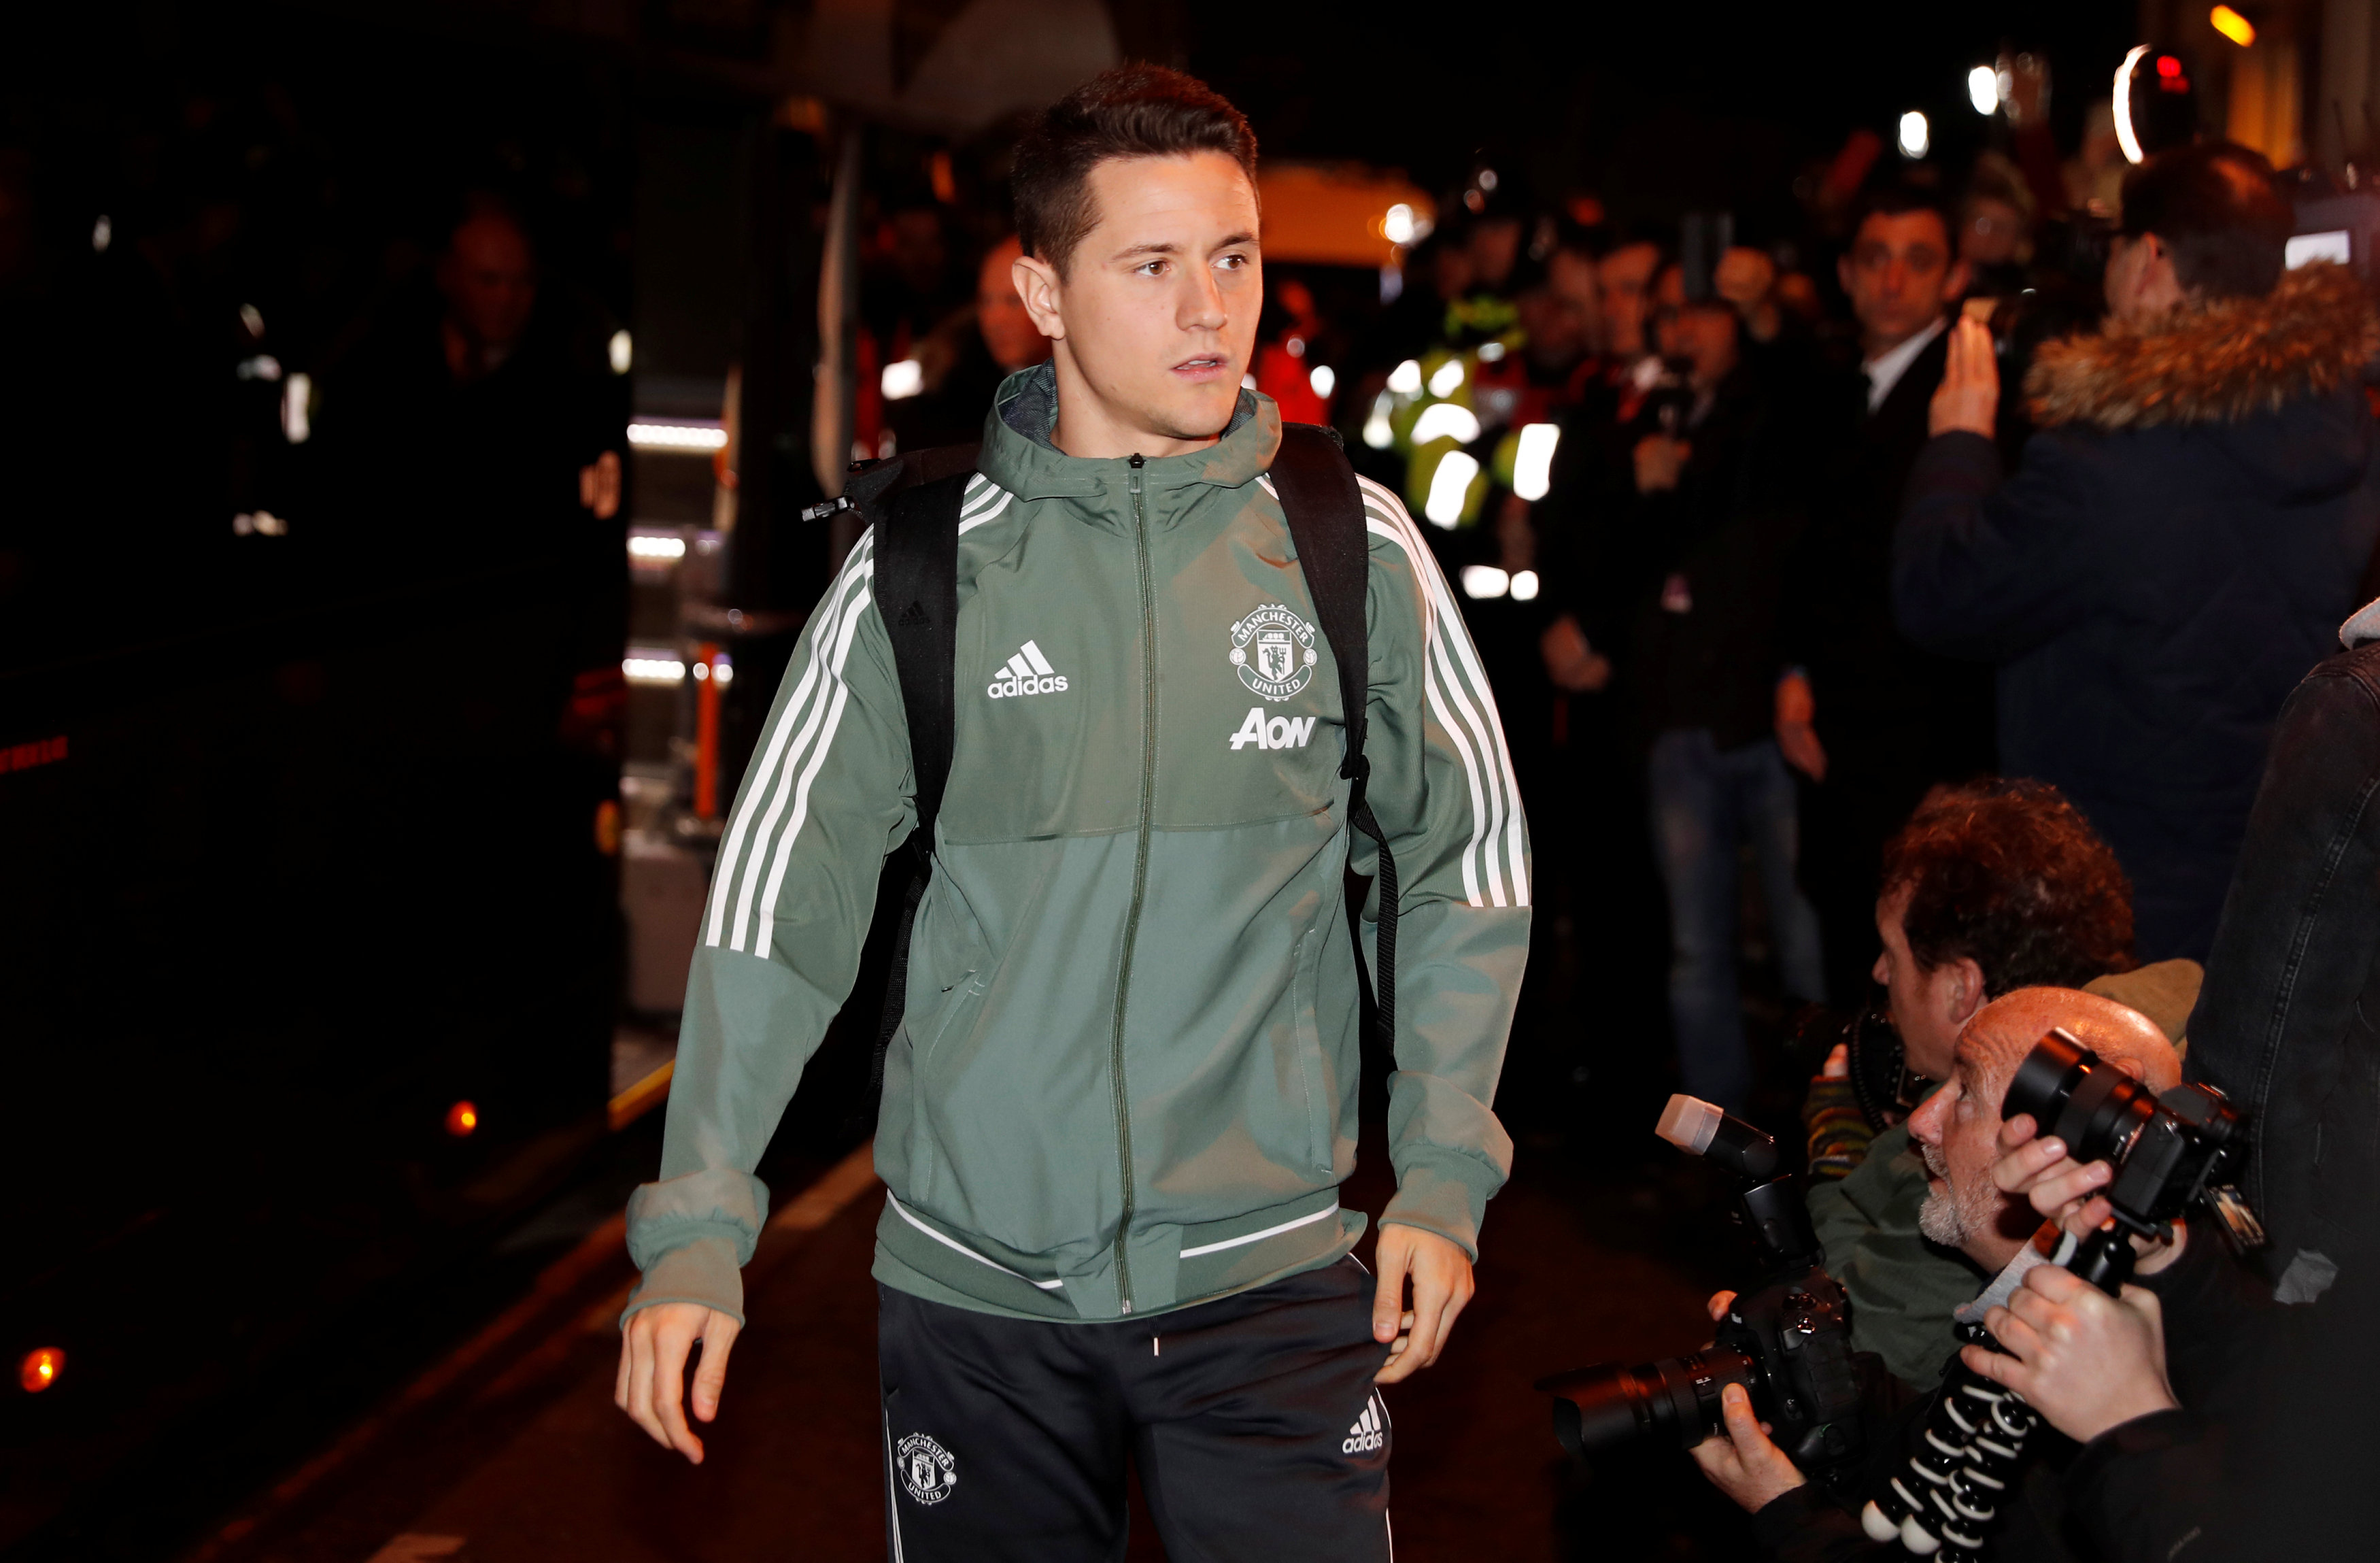 United will continue fighting for every trophy, says Herrera